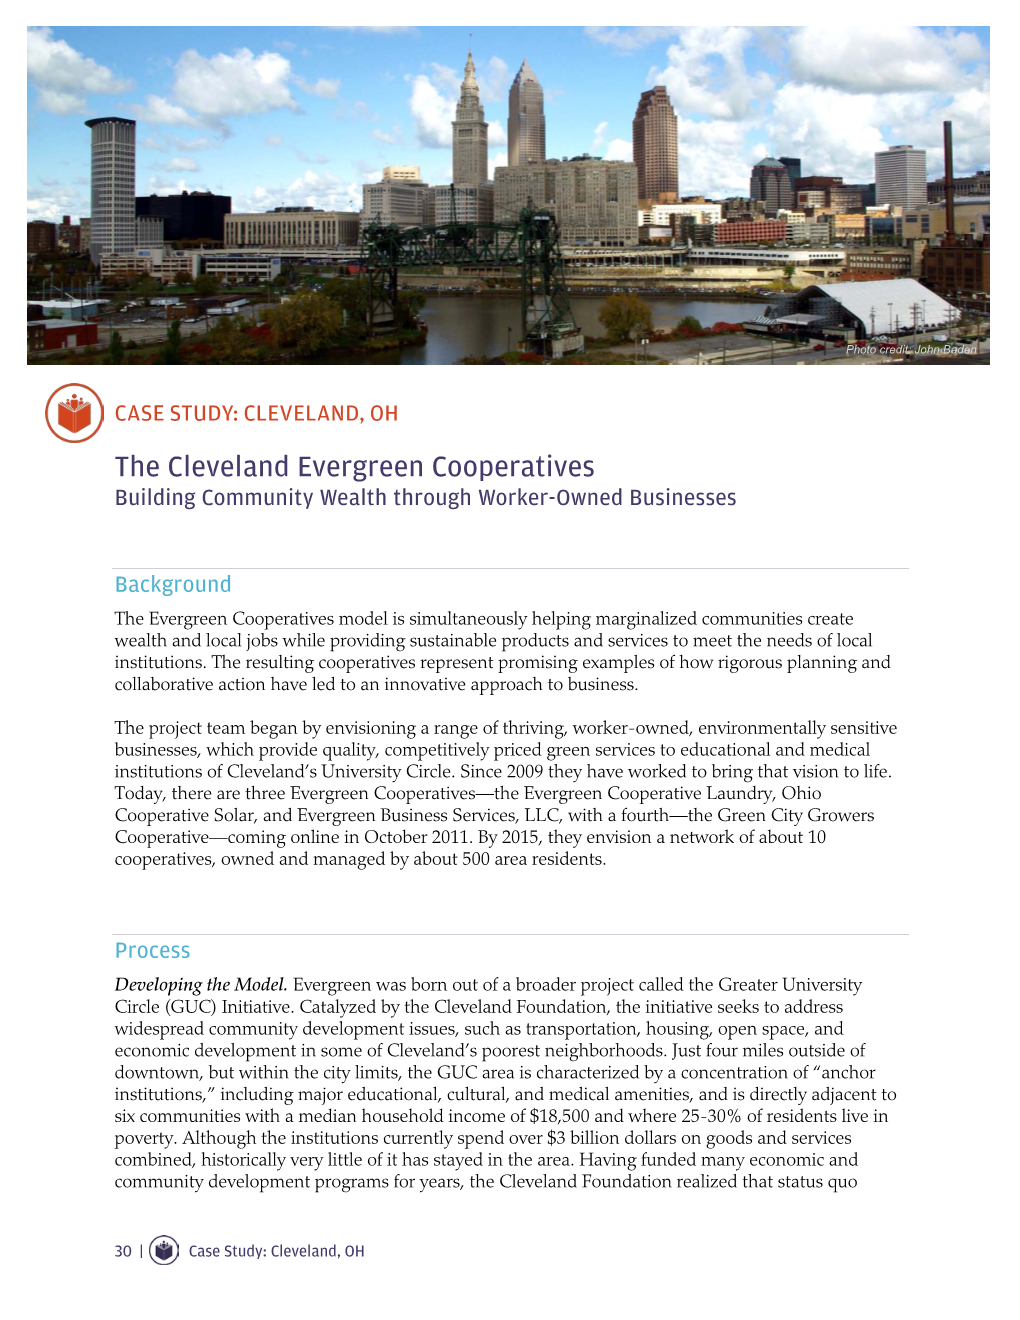 Case Study: the Cleveland Evergreen Cooperatives